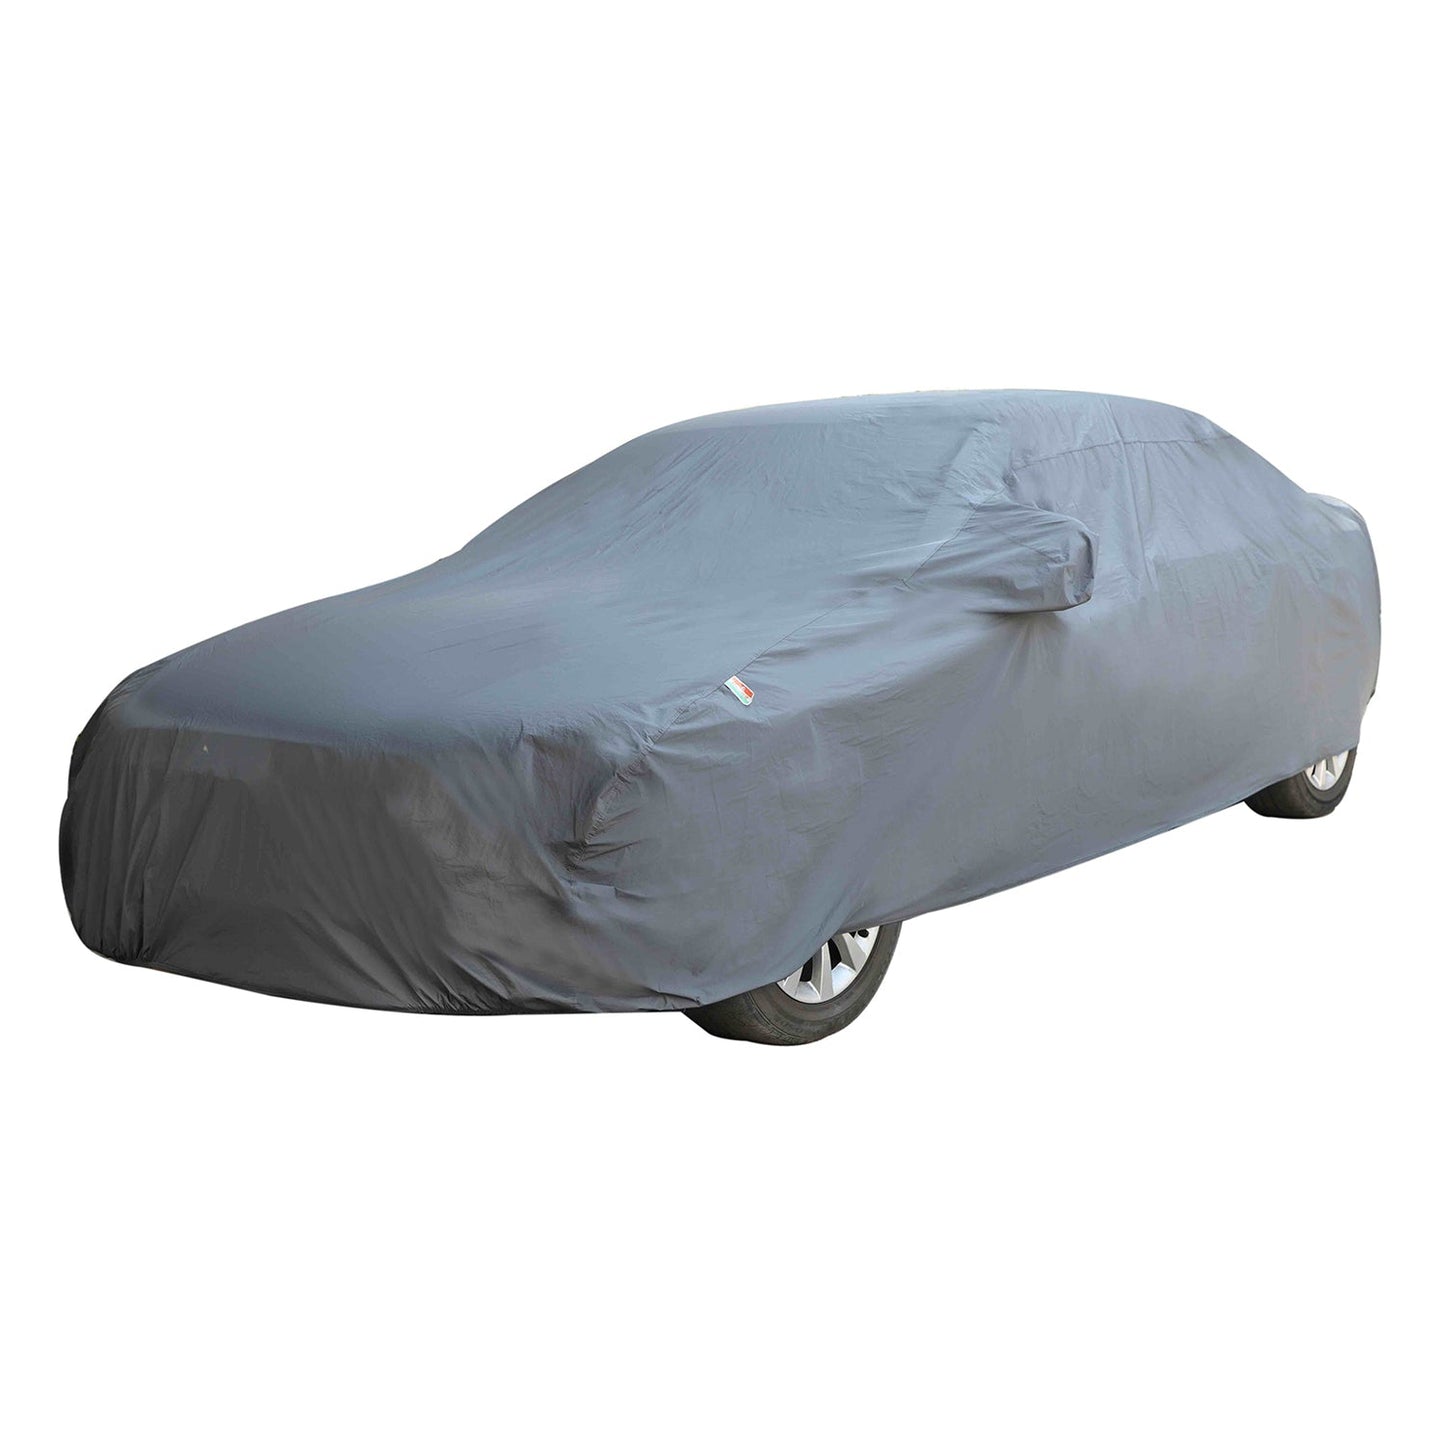 Oshotto Dark Grey 100% Anti Reflective, dustproof and Water Proof Car Body Cover with Mirror Pockets For Volkswagen Virtus